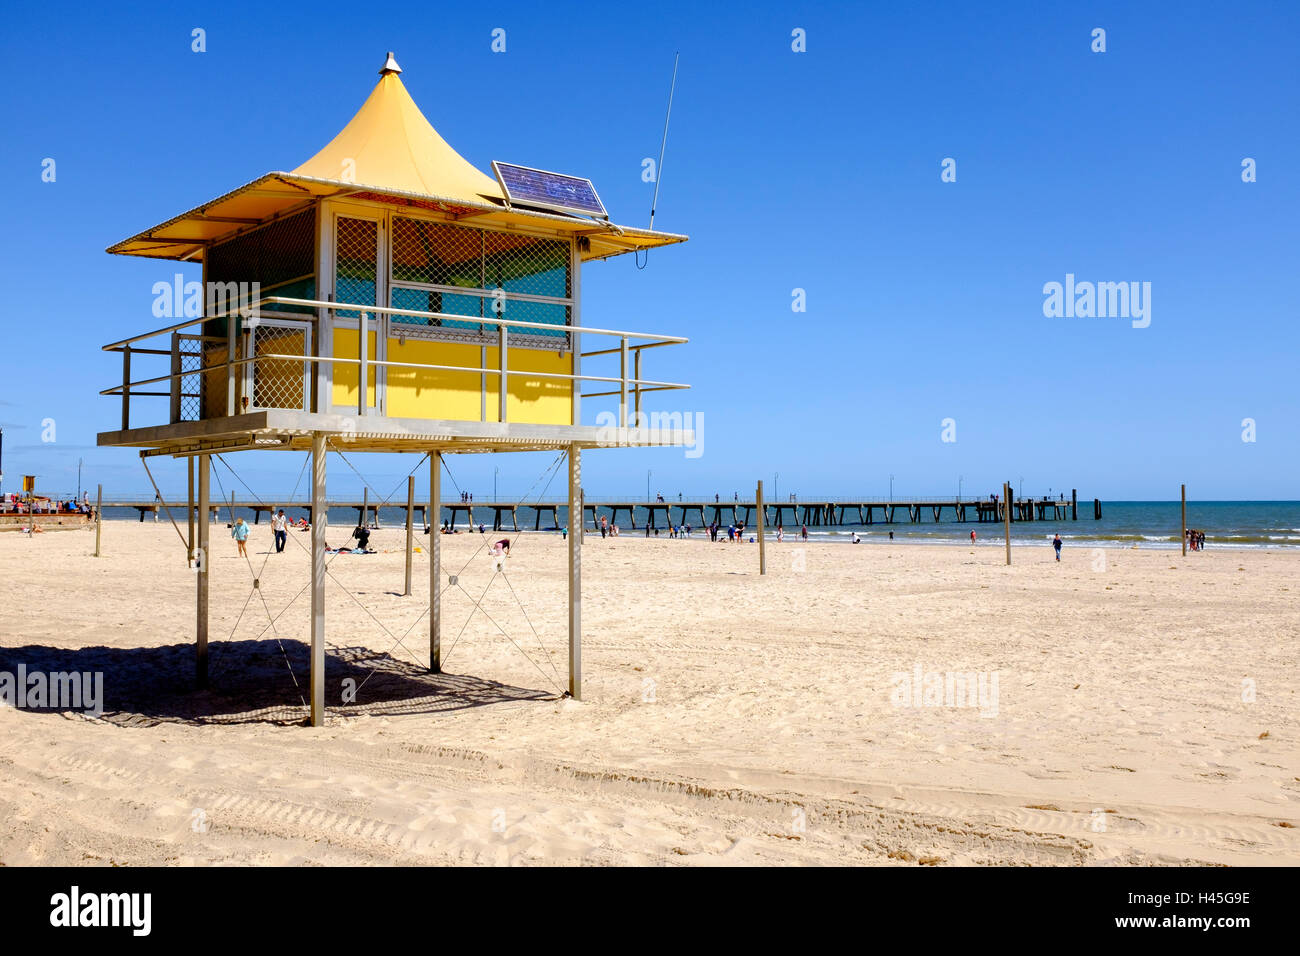 A lifeguard tower at Glenelg,  South Australia's most popular beach and seaside entertainment area. Stock Photo